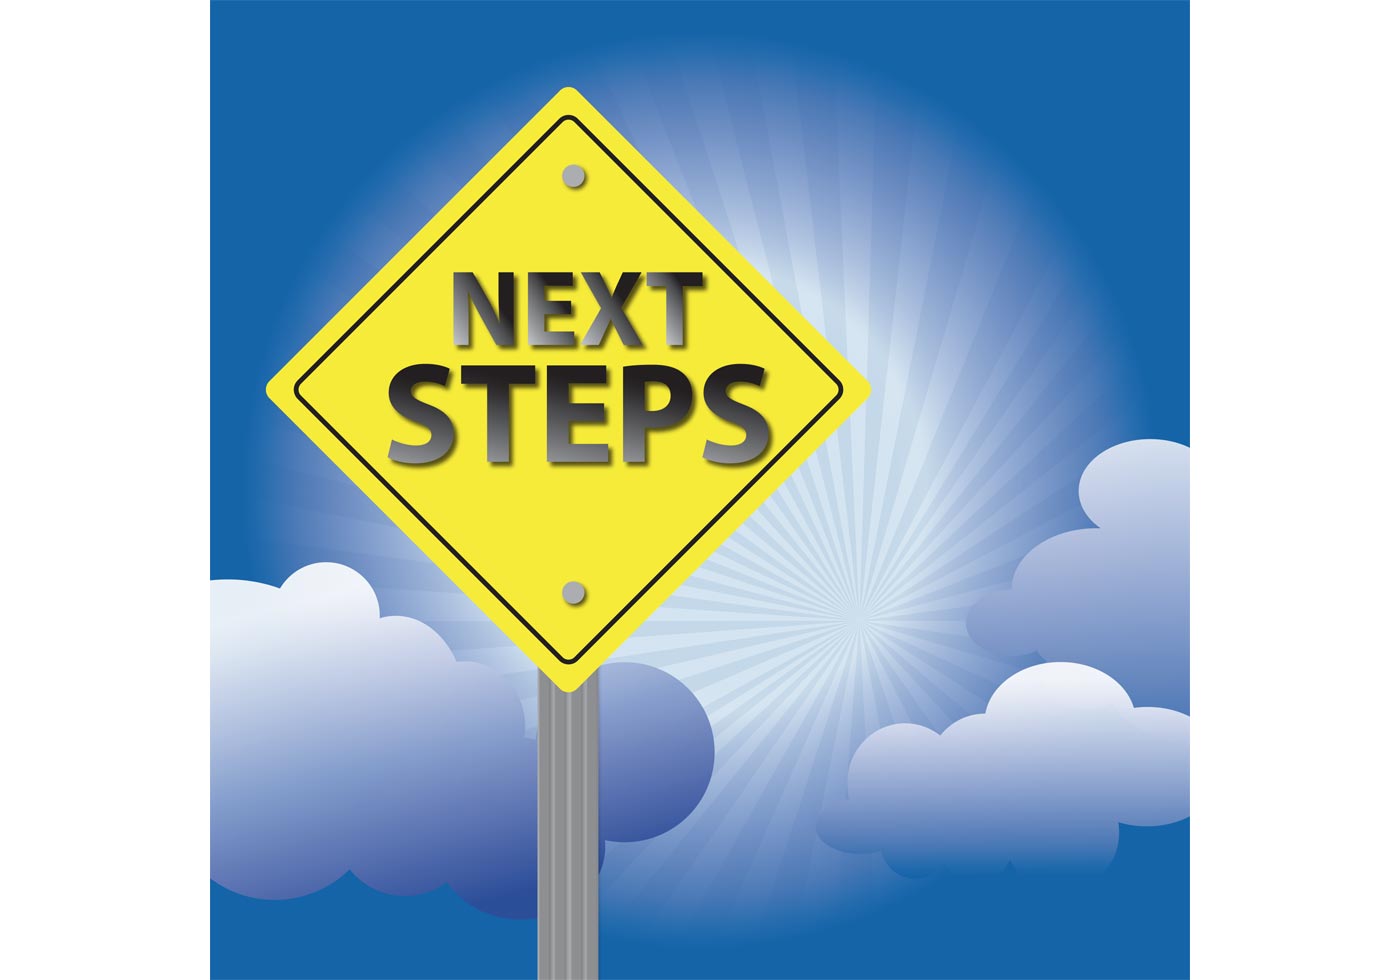 Download the Next Steps Sign Background 84574